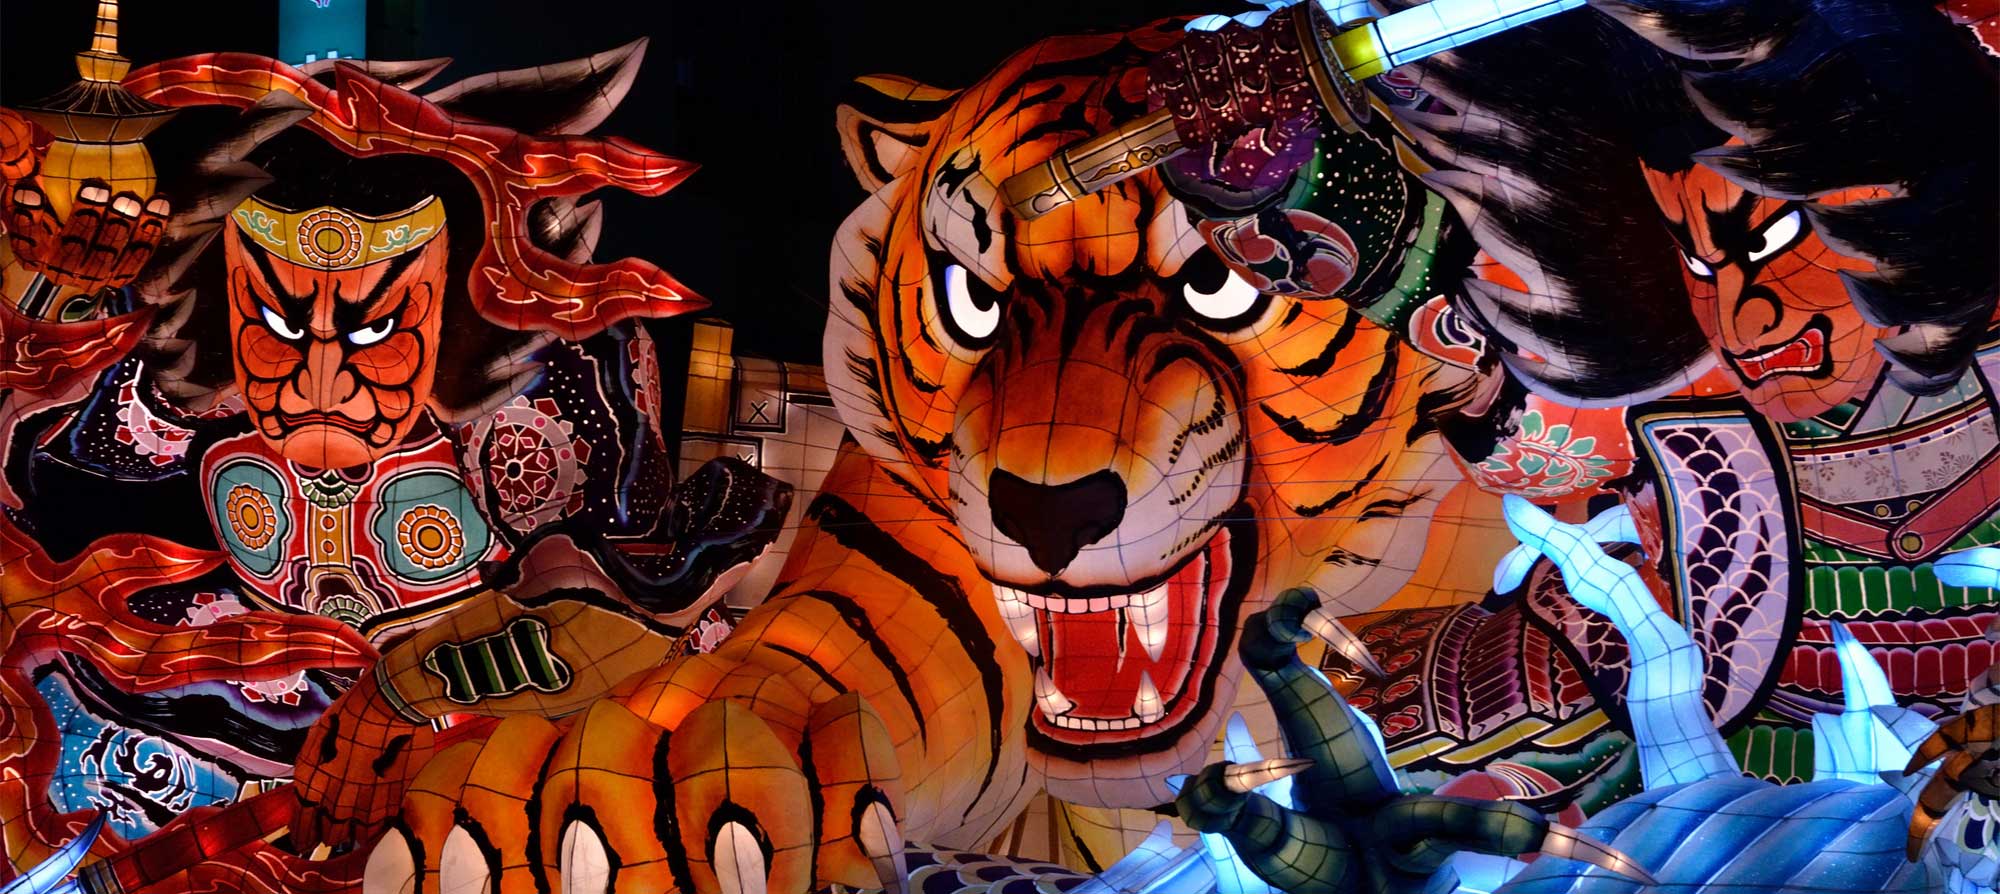 Large lantern floats Nebuta, which are constructed of painted washi paper over a wire frame. Aomori Prefecture